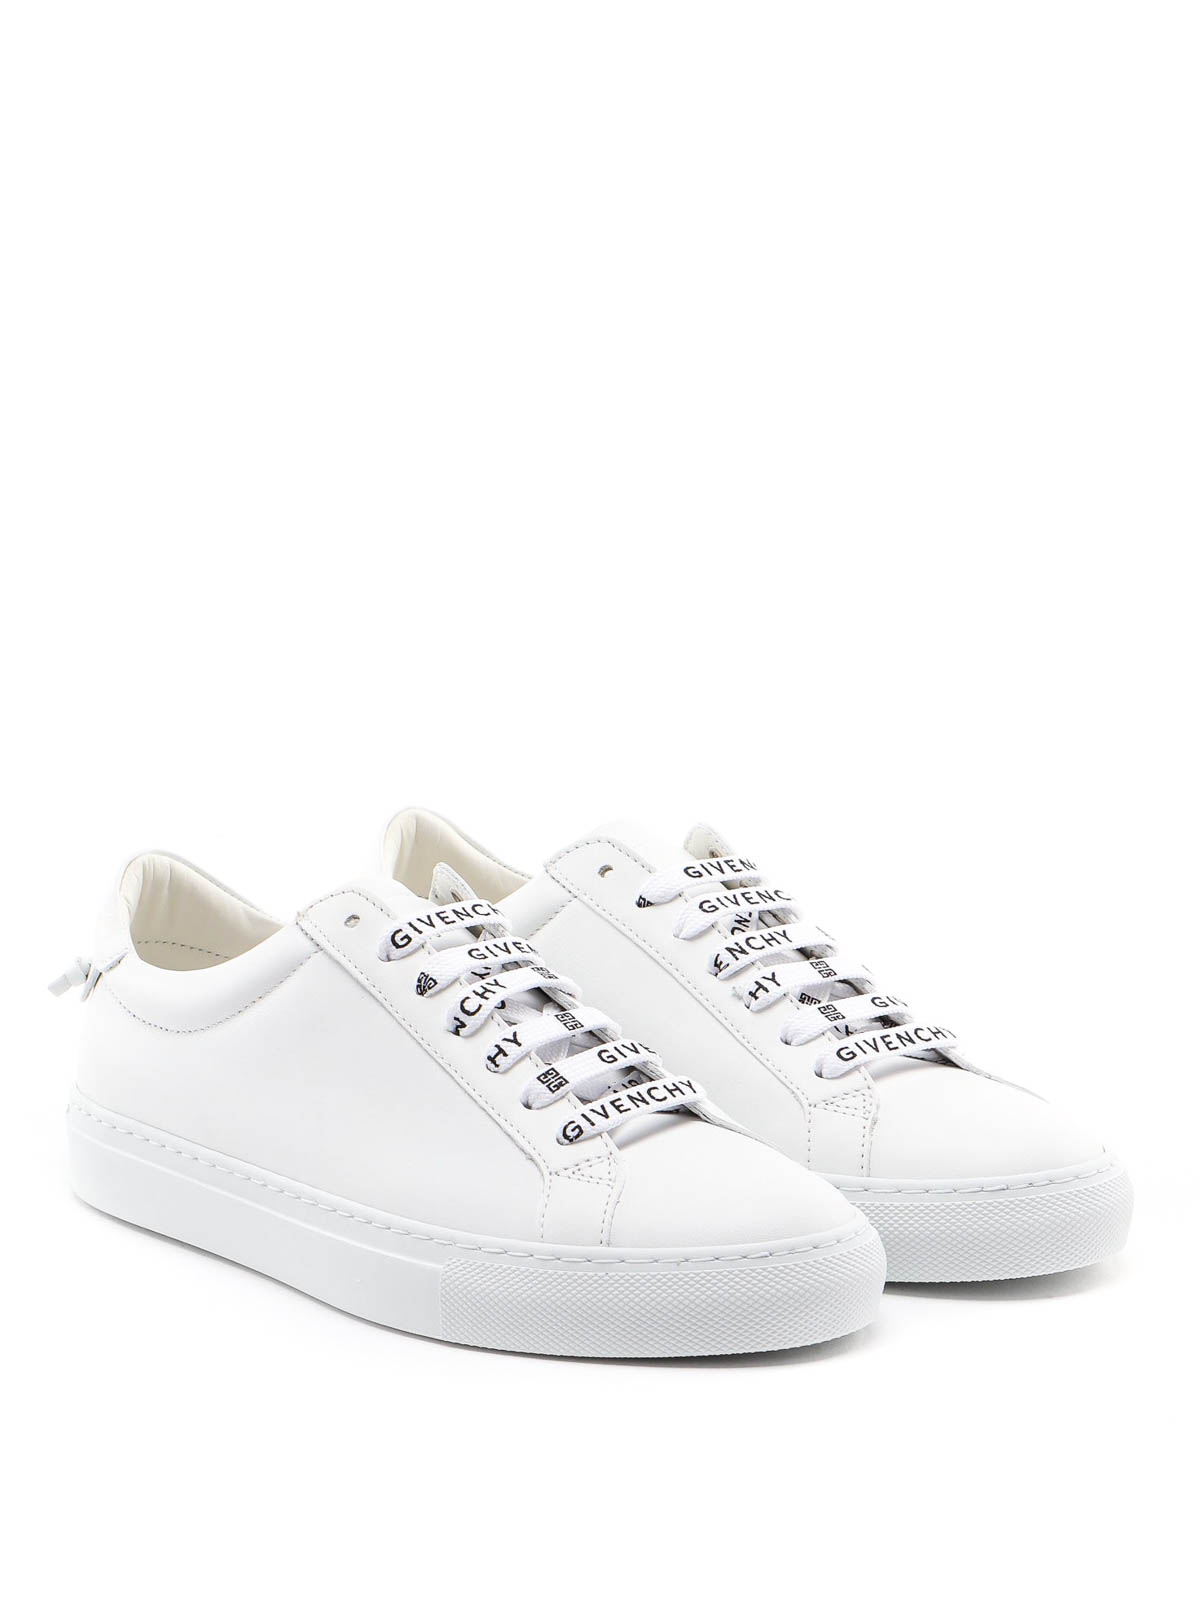 Trainers Givenchy - Urban Street leather sneakers - BE0003E0GC100